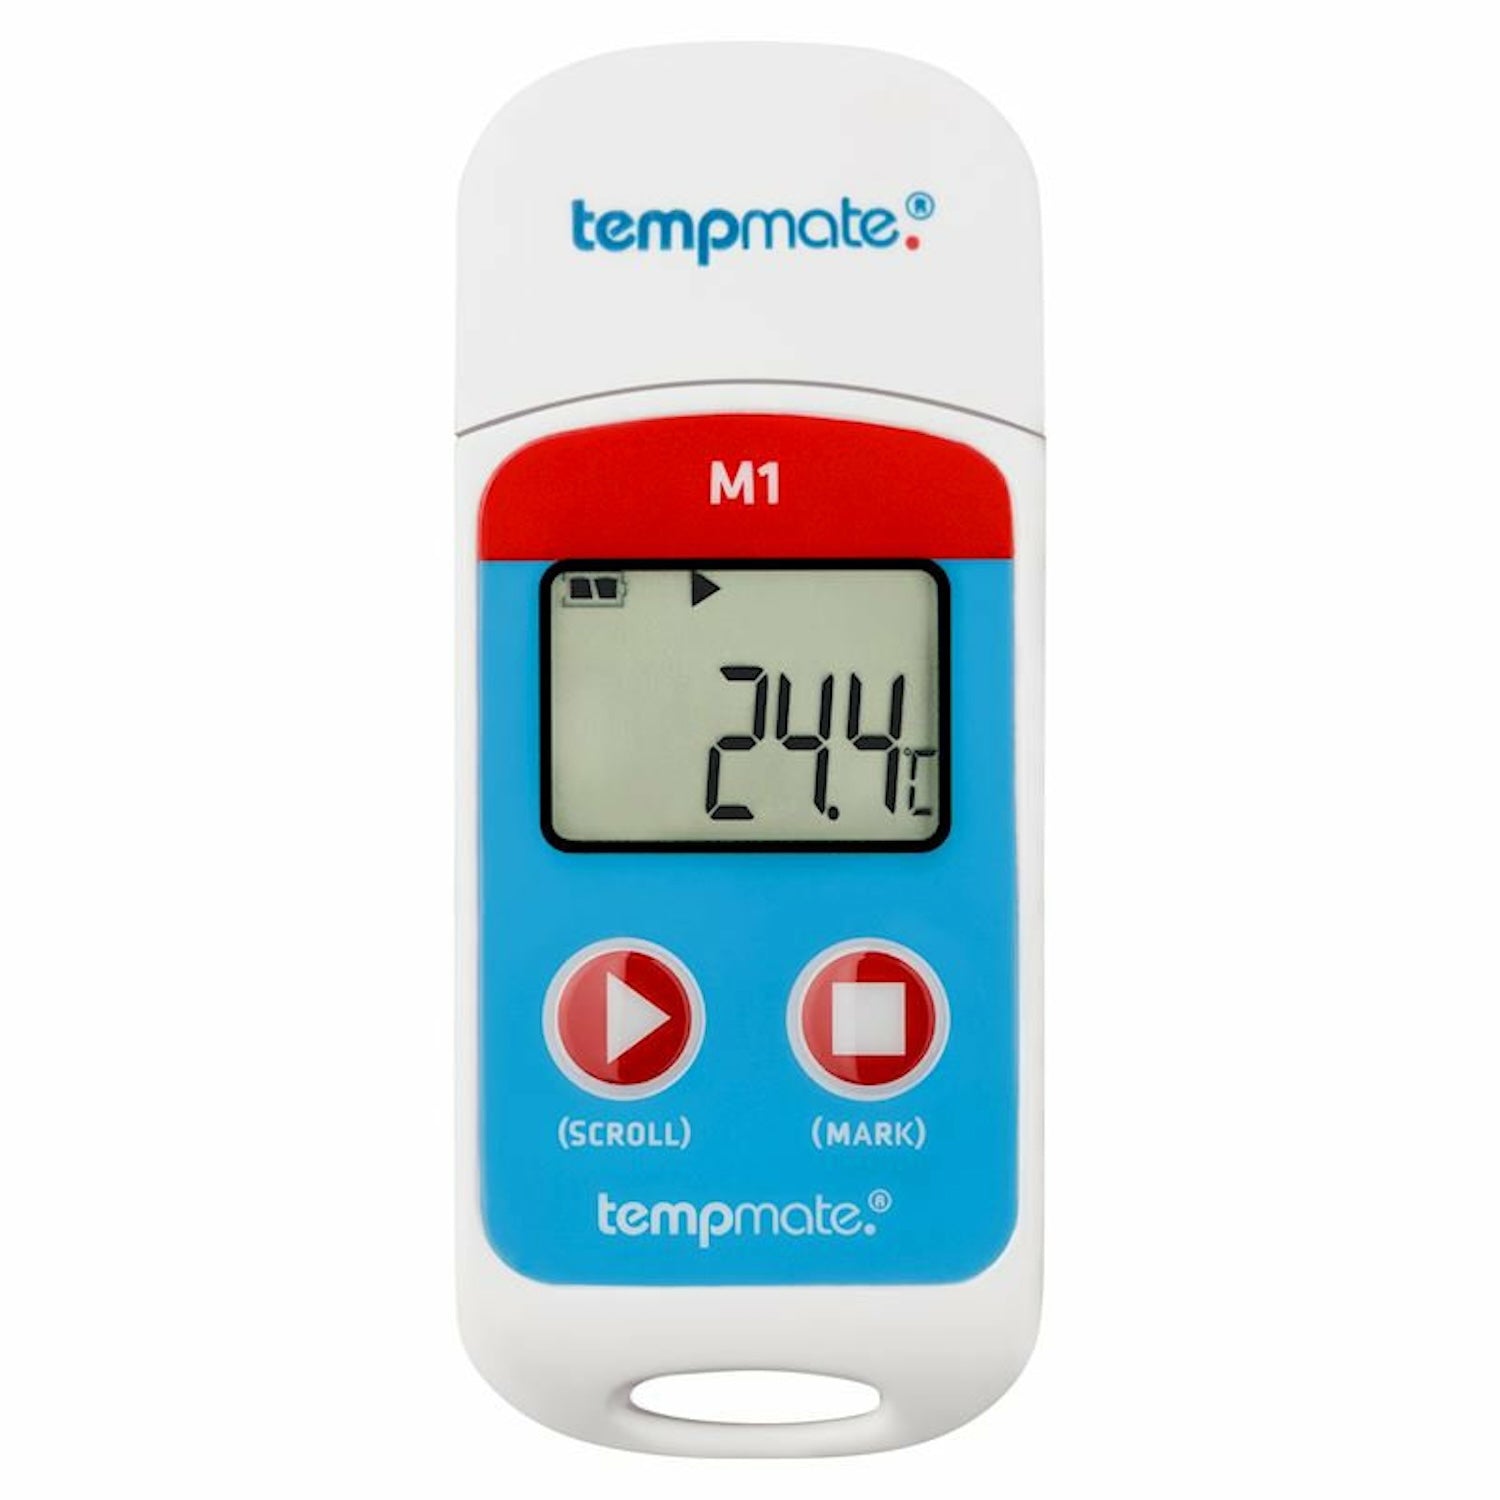 Tempmate-M1 USB Data Logger with calibration certificate